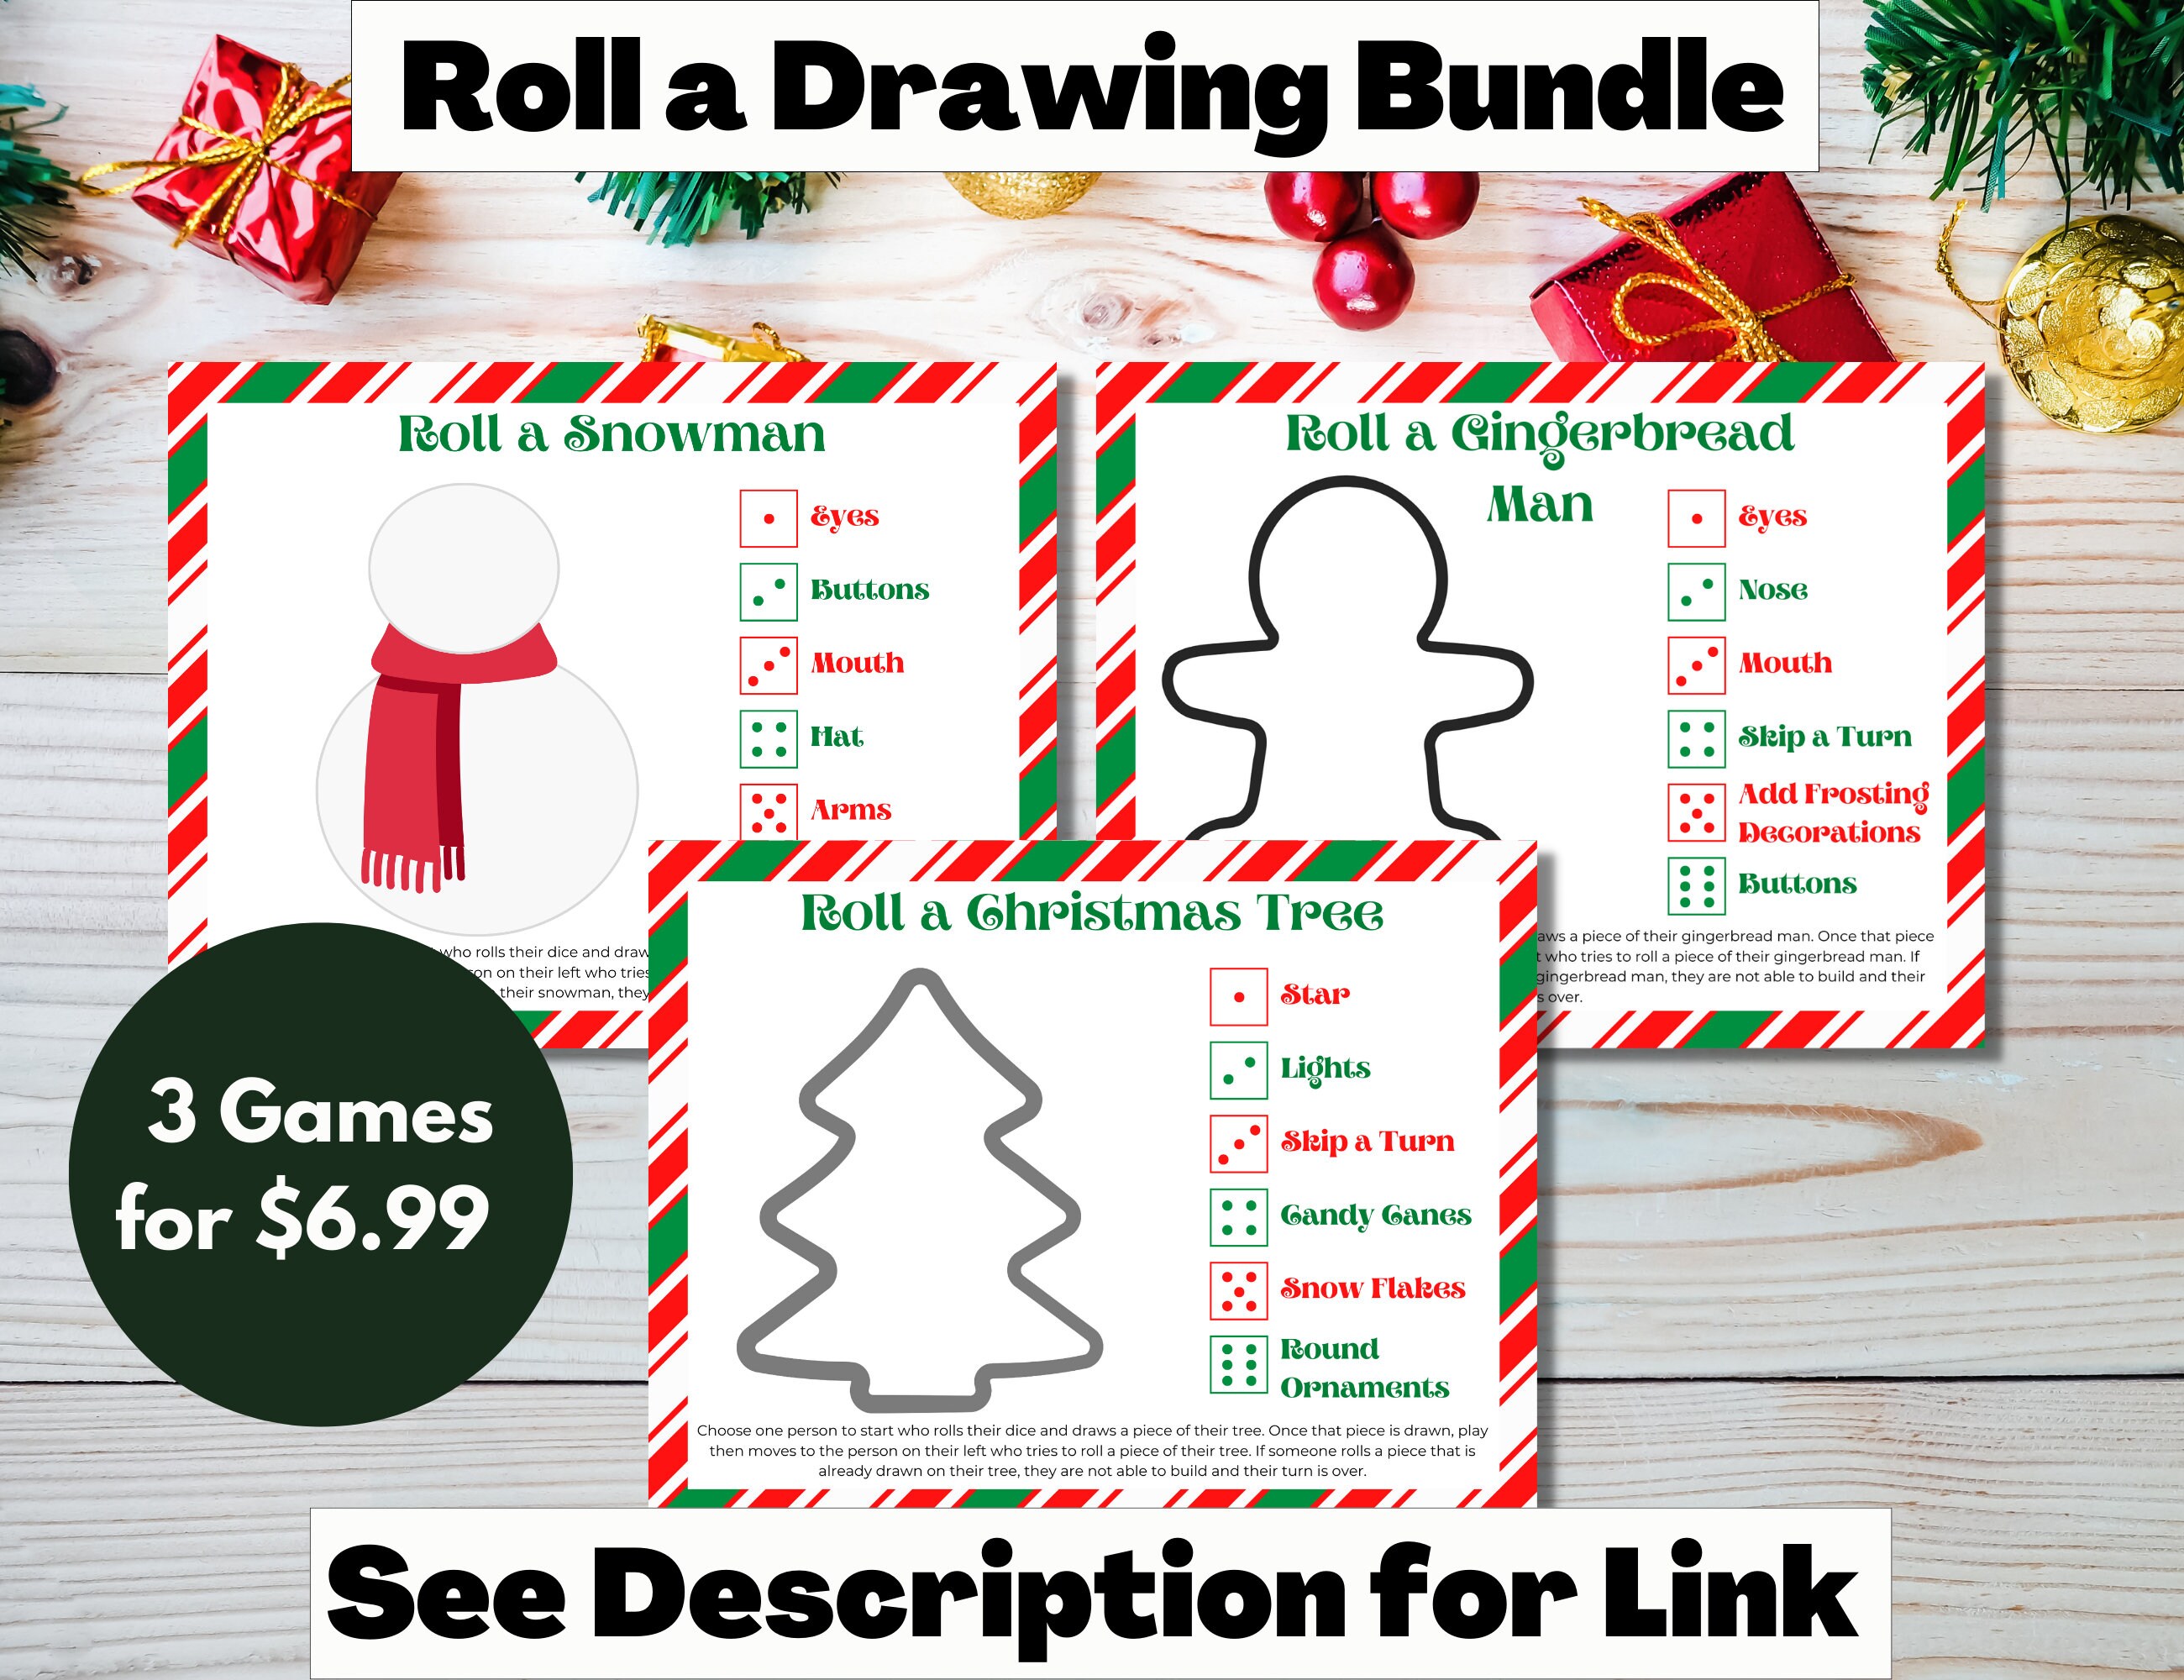 Christmas Think Fast Game – LivelyGamePrints